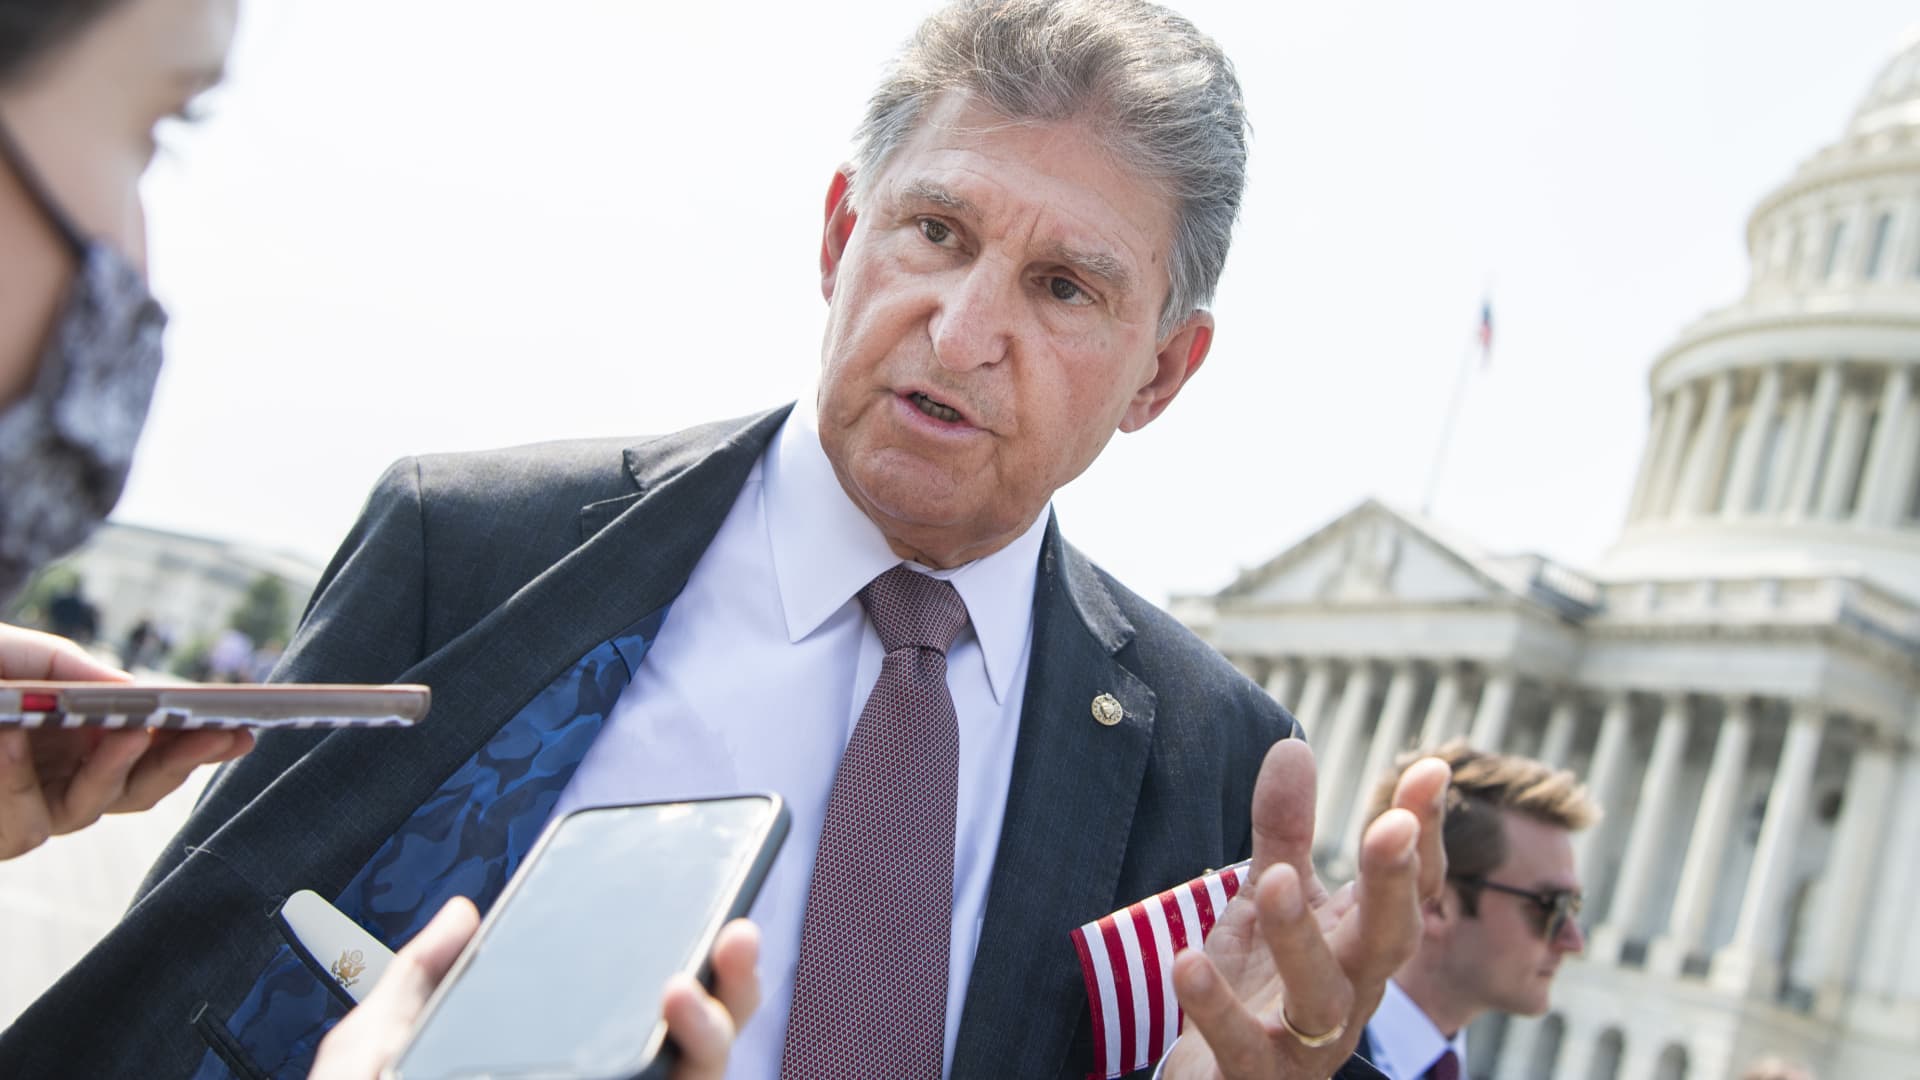 Sen. Joe Manchin, D-W.Va., talks with reporters after a remembrance ceremony on the east front steps of the U.S. Capitol for the 20th anniversary of the 9/11 terrorist attacks on Monday, September 13, 2021.